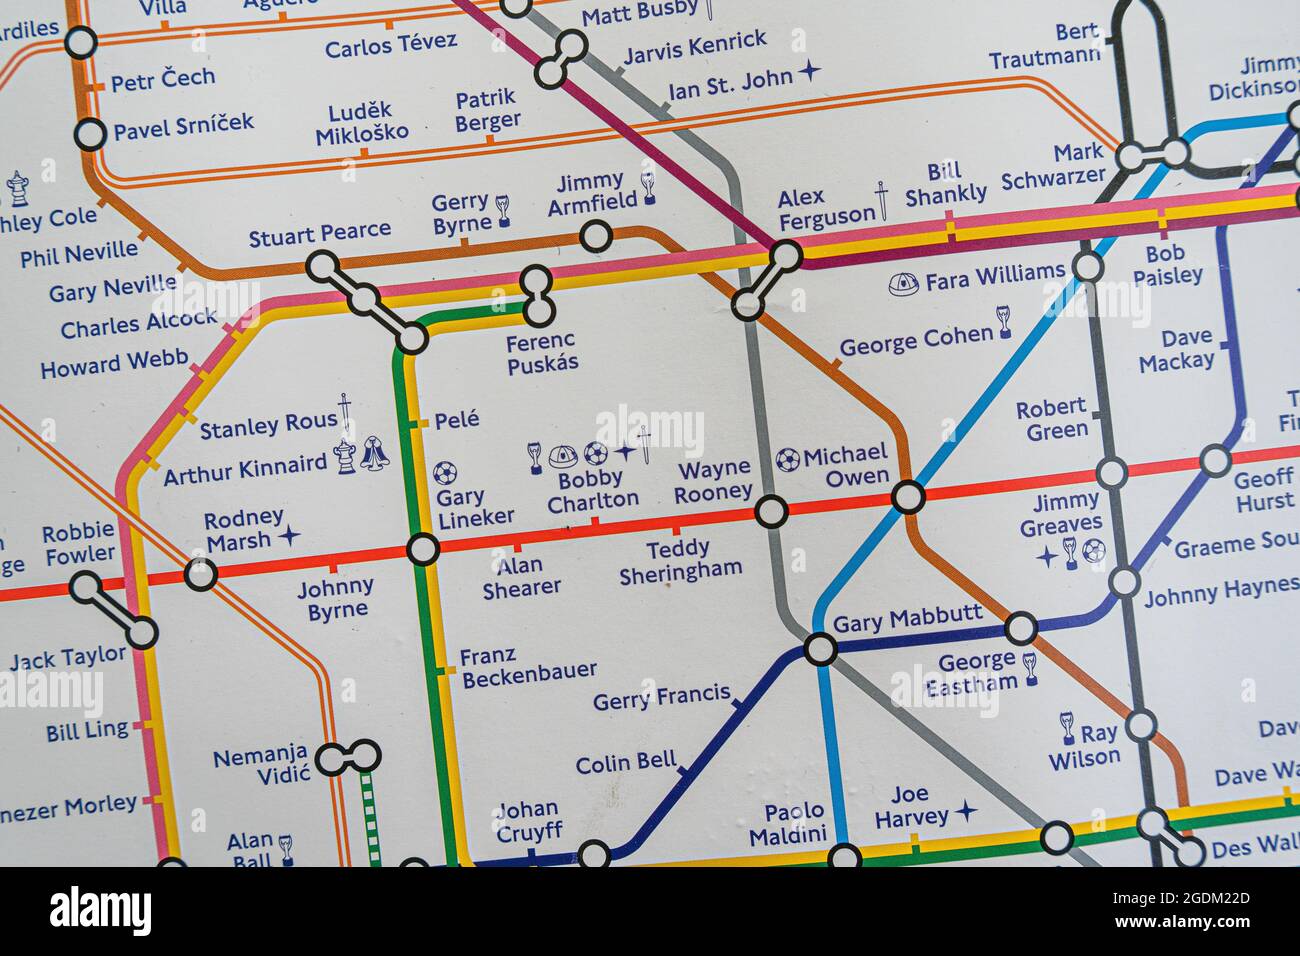 London Underground Football Themed Map With The Names Of Players And